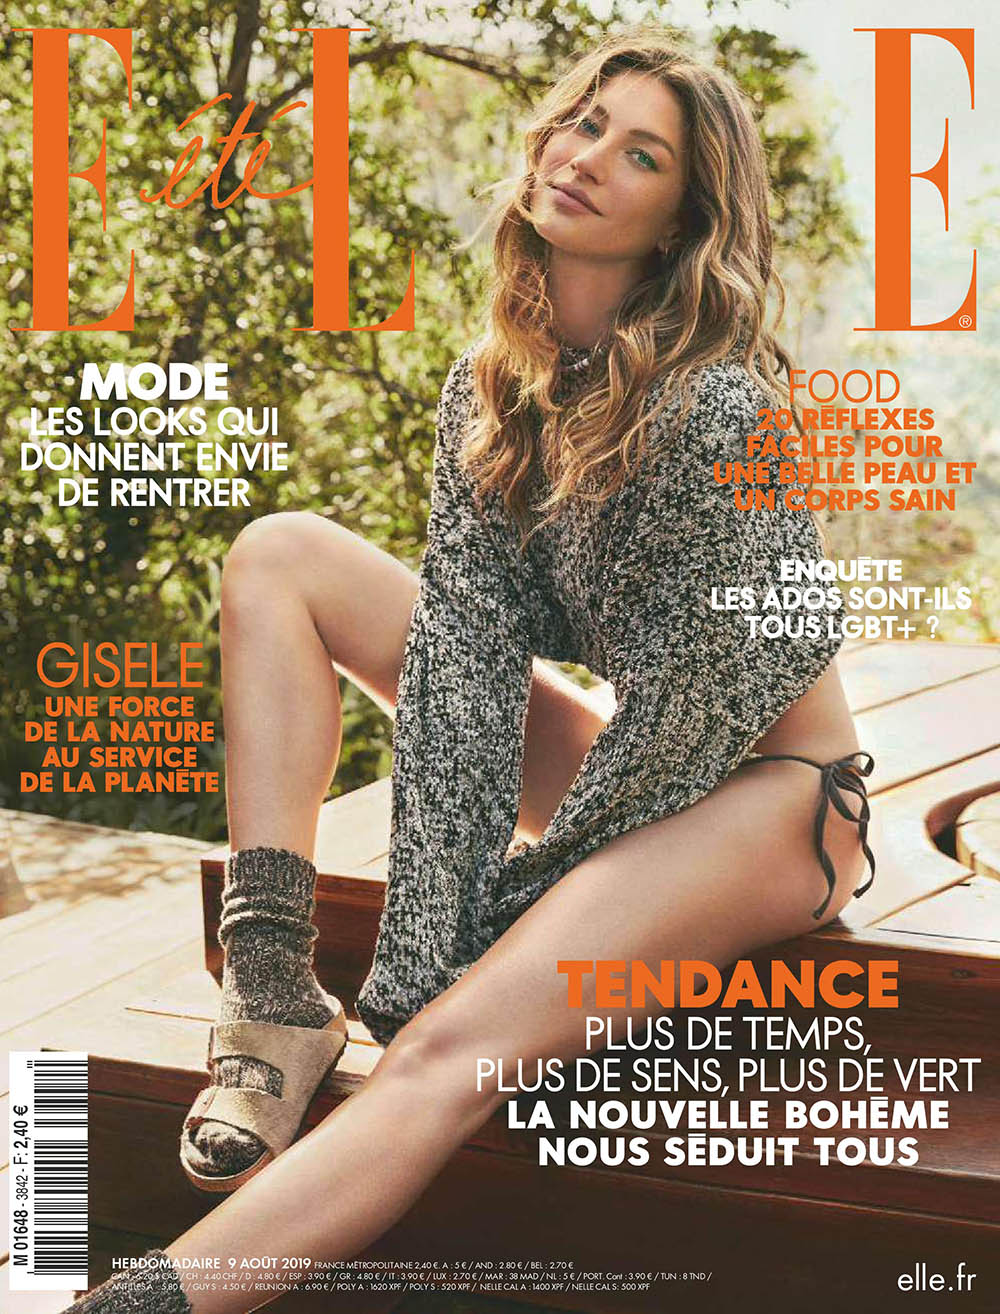 Gisele Bündchen covers Elle France August 9th, 2019 by Nino Munoz